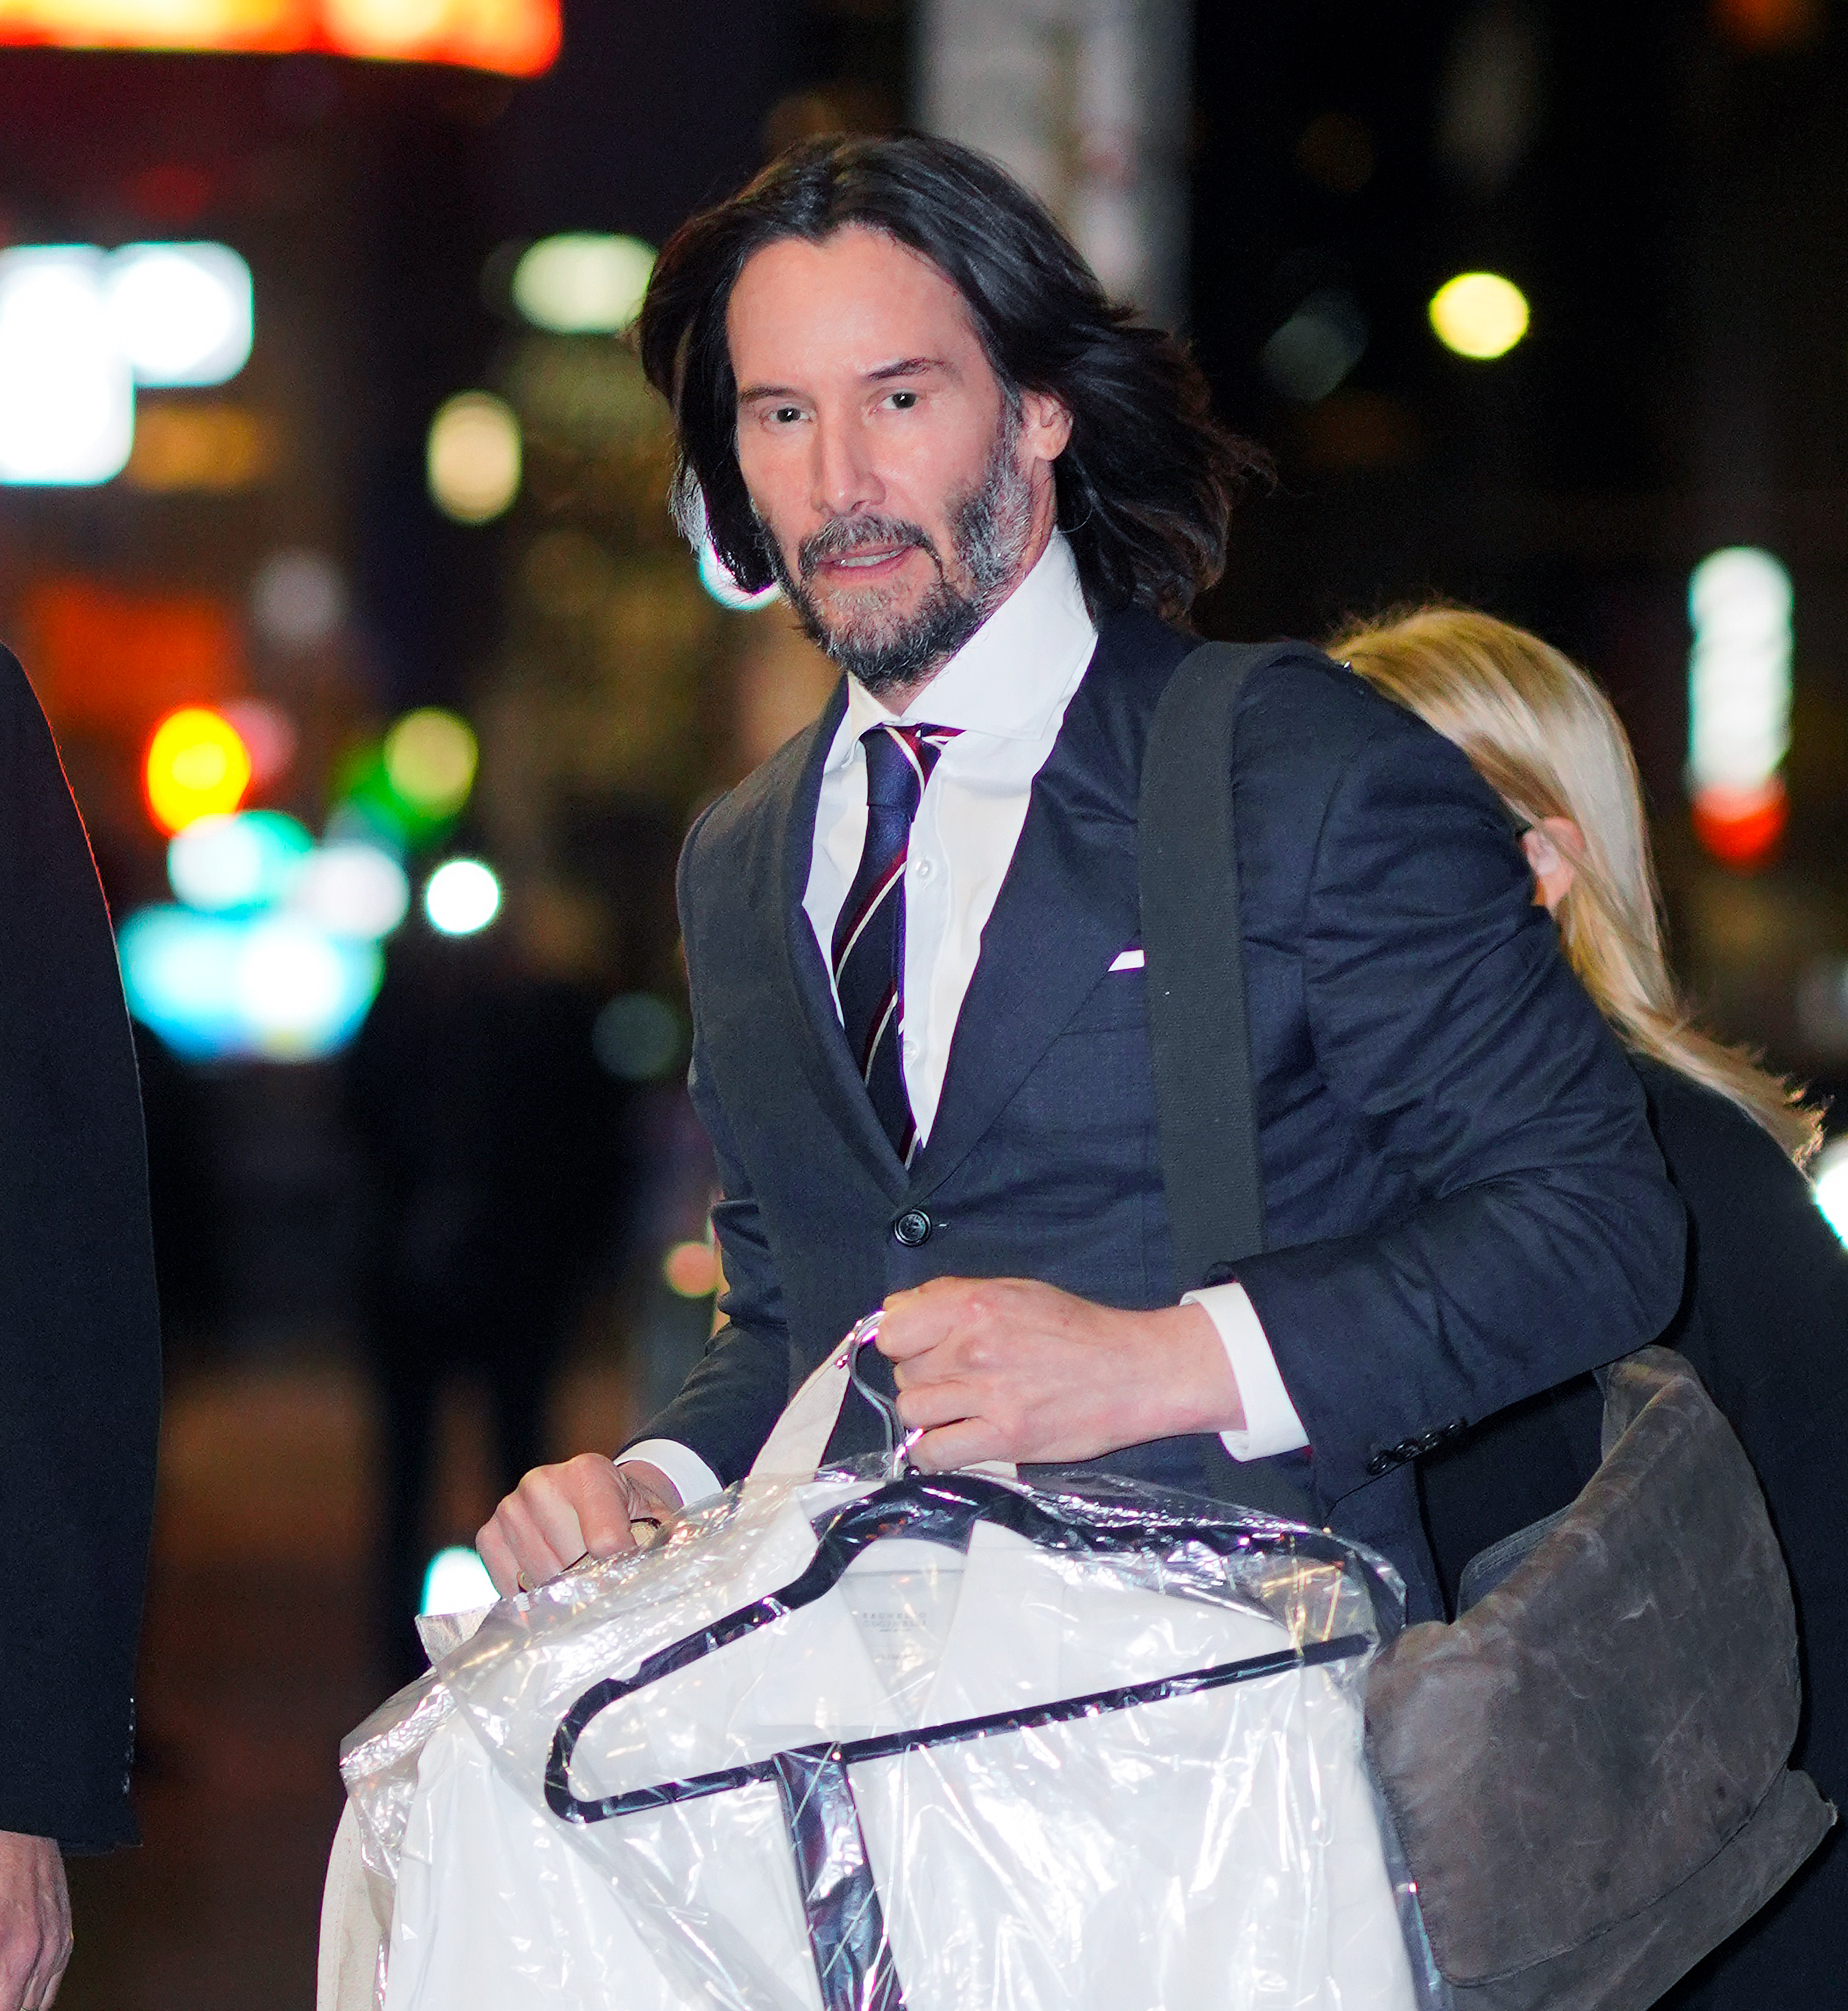 Keanu Reeves kommt im Ed Sullivan Theater für "The Late Show with Stephen Colbert" am 13. Dezember 2021 in New York City an. | Quelle: Getty Images